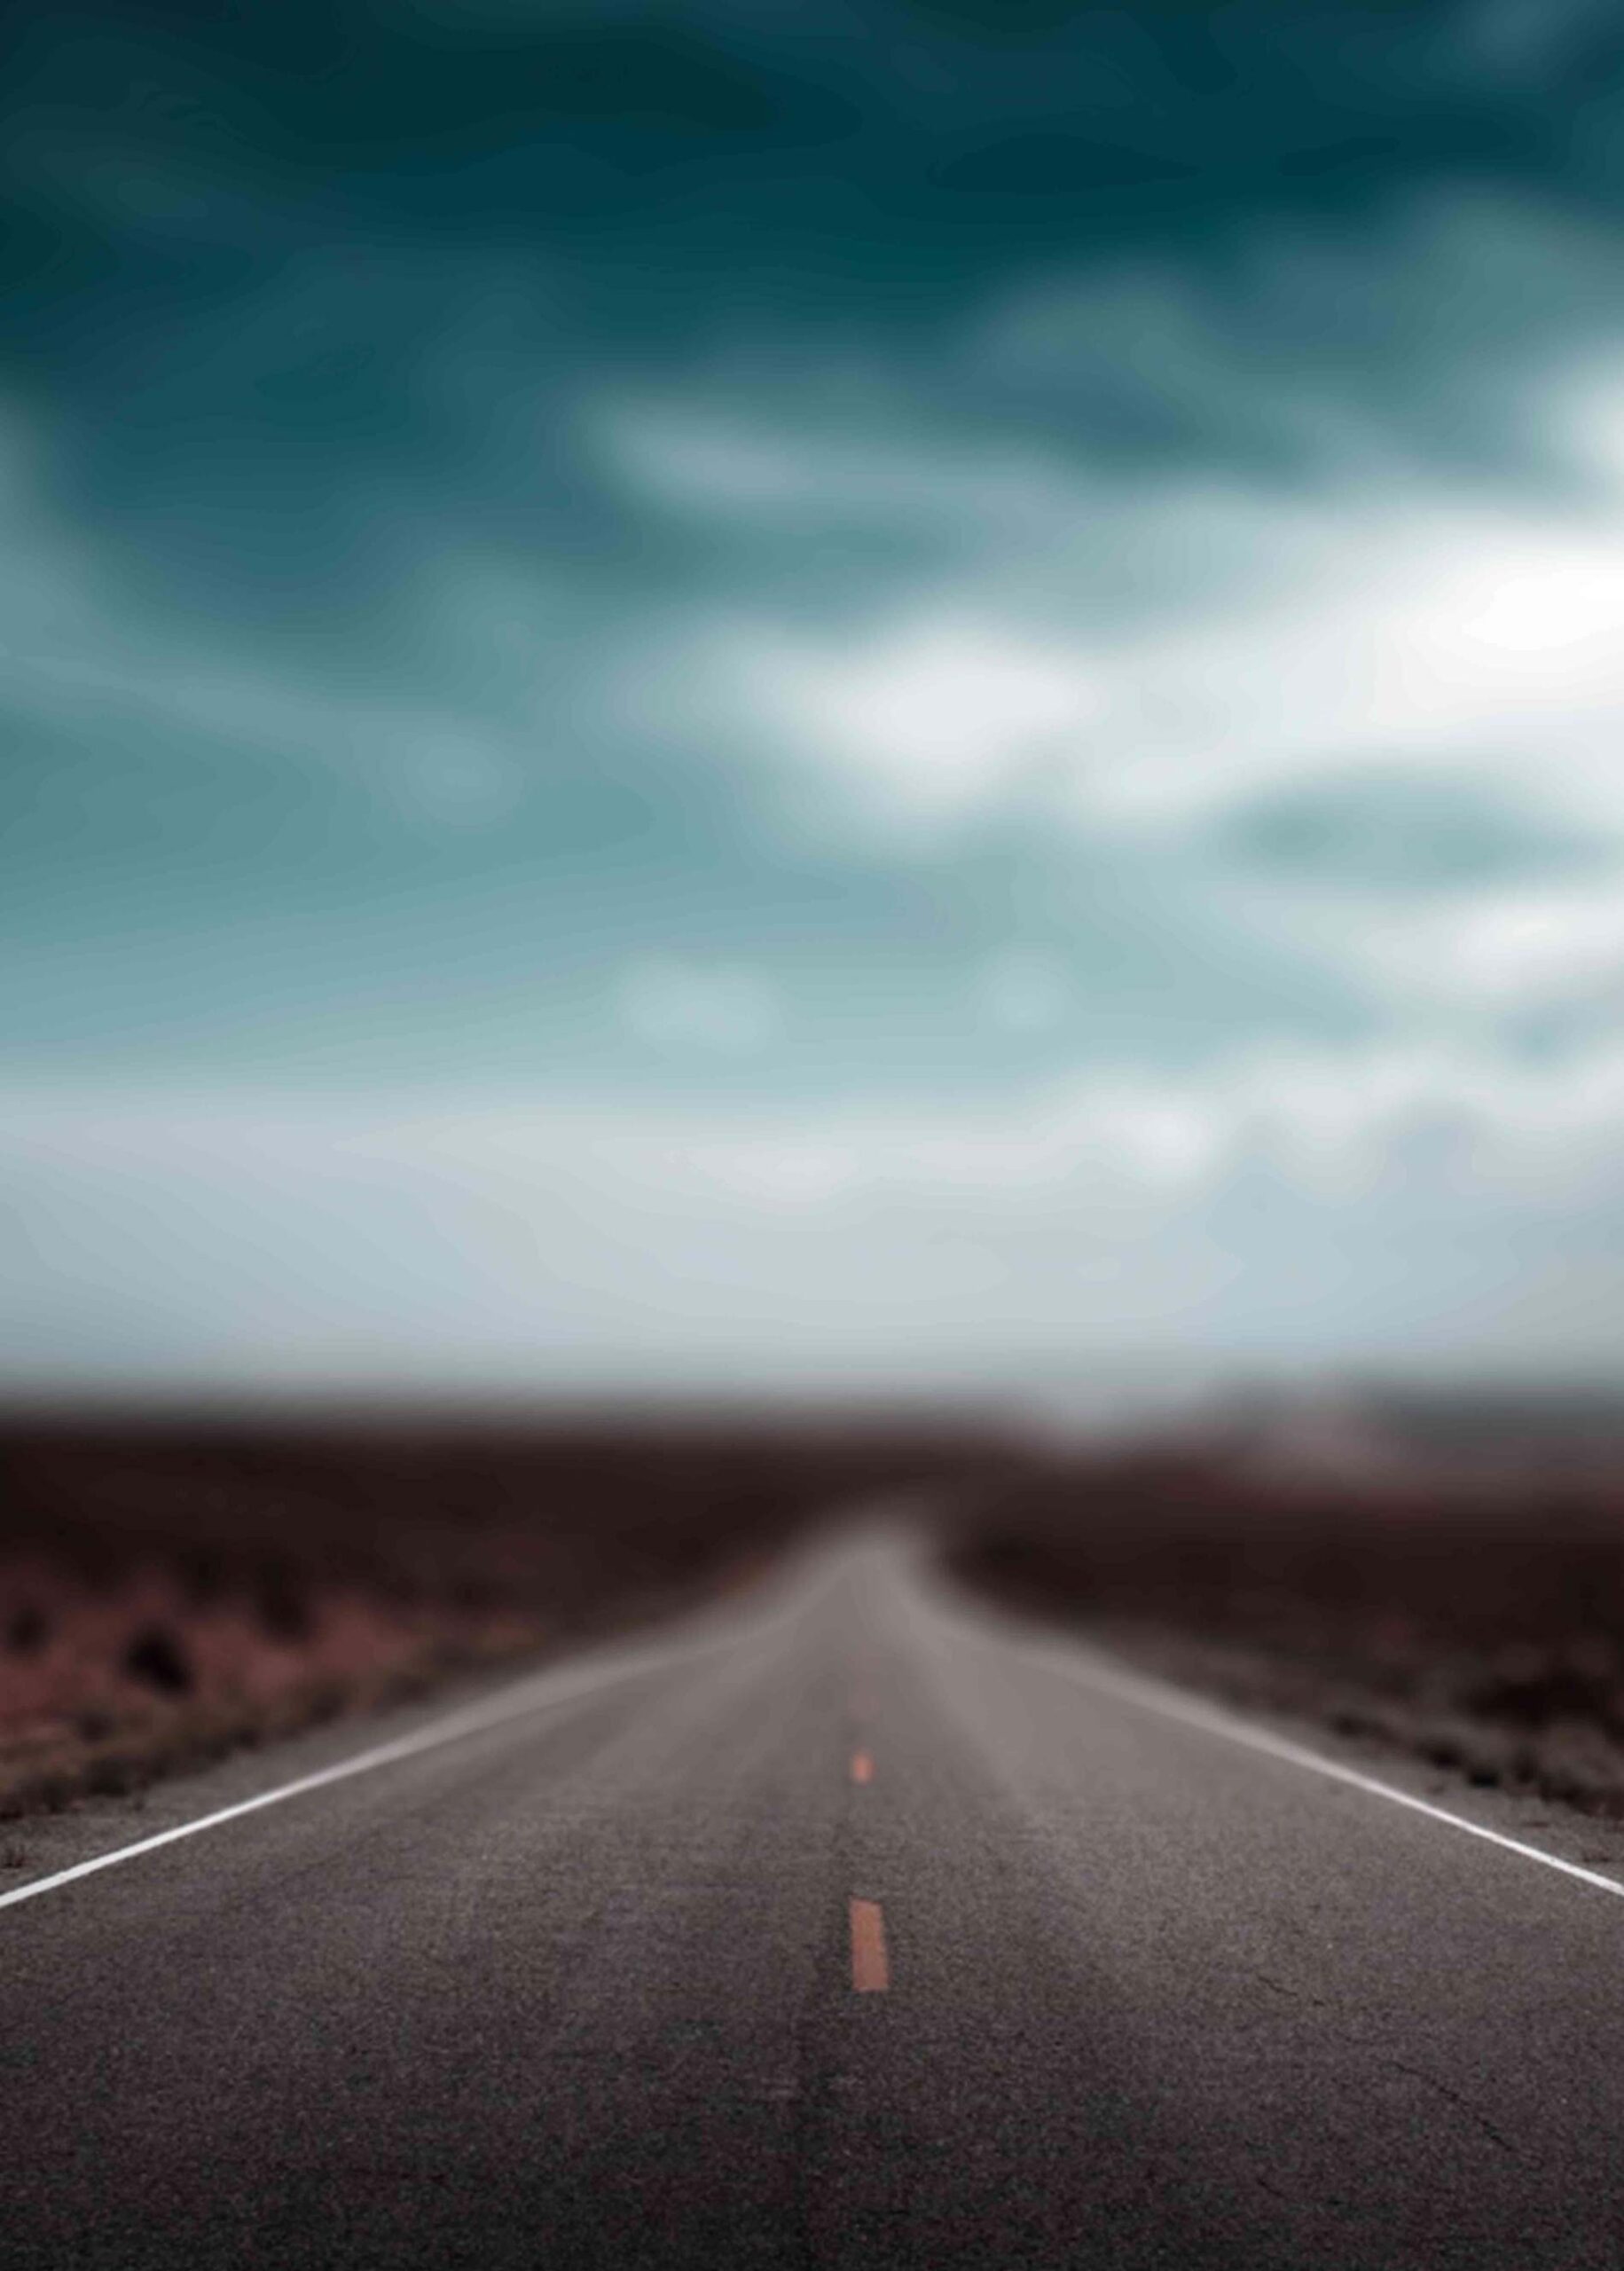 Blur Background With Road and Sky